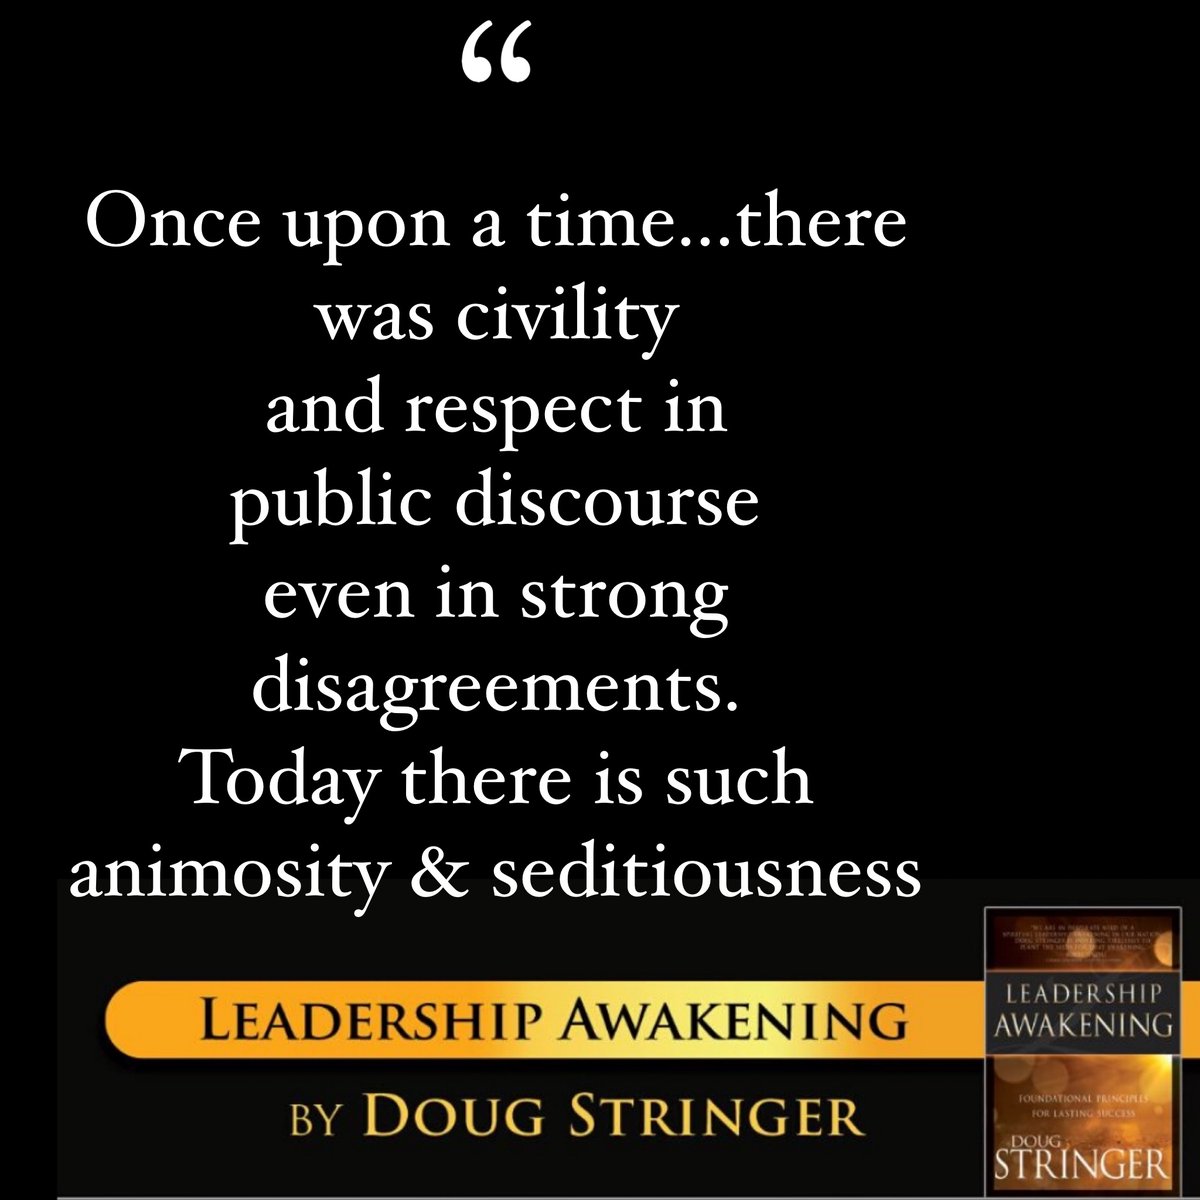 Doug Stringer On Twitter Once Upon A Time There Was Civility